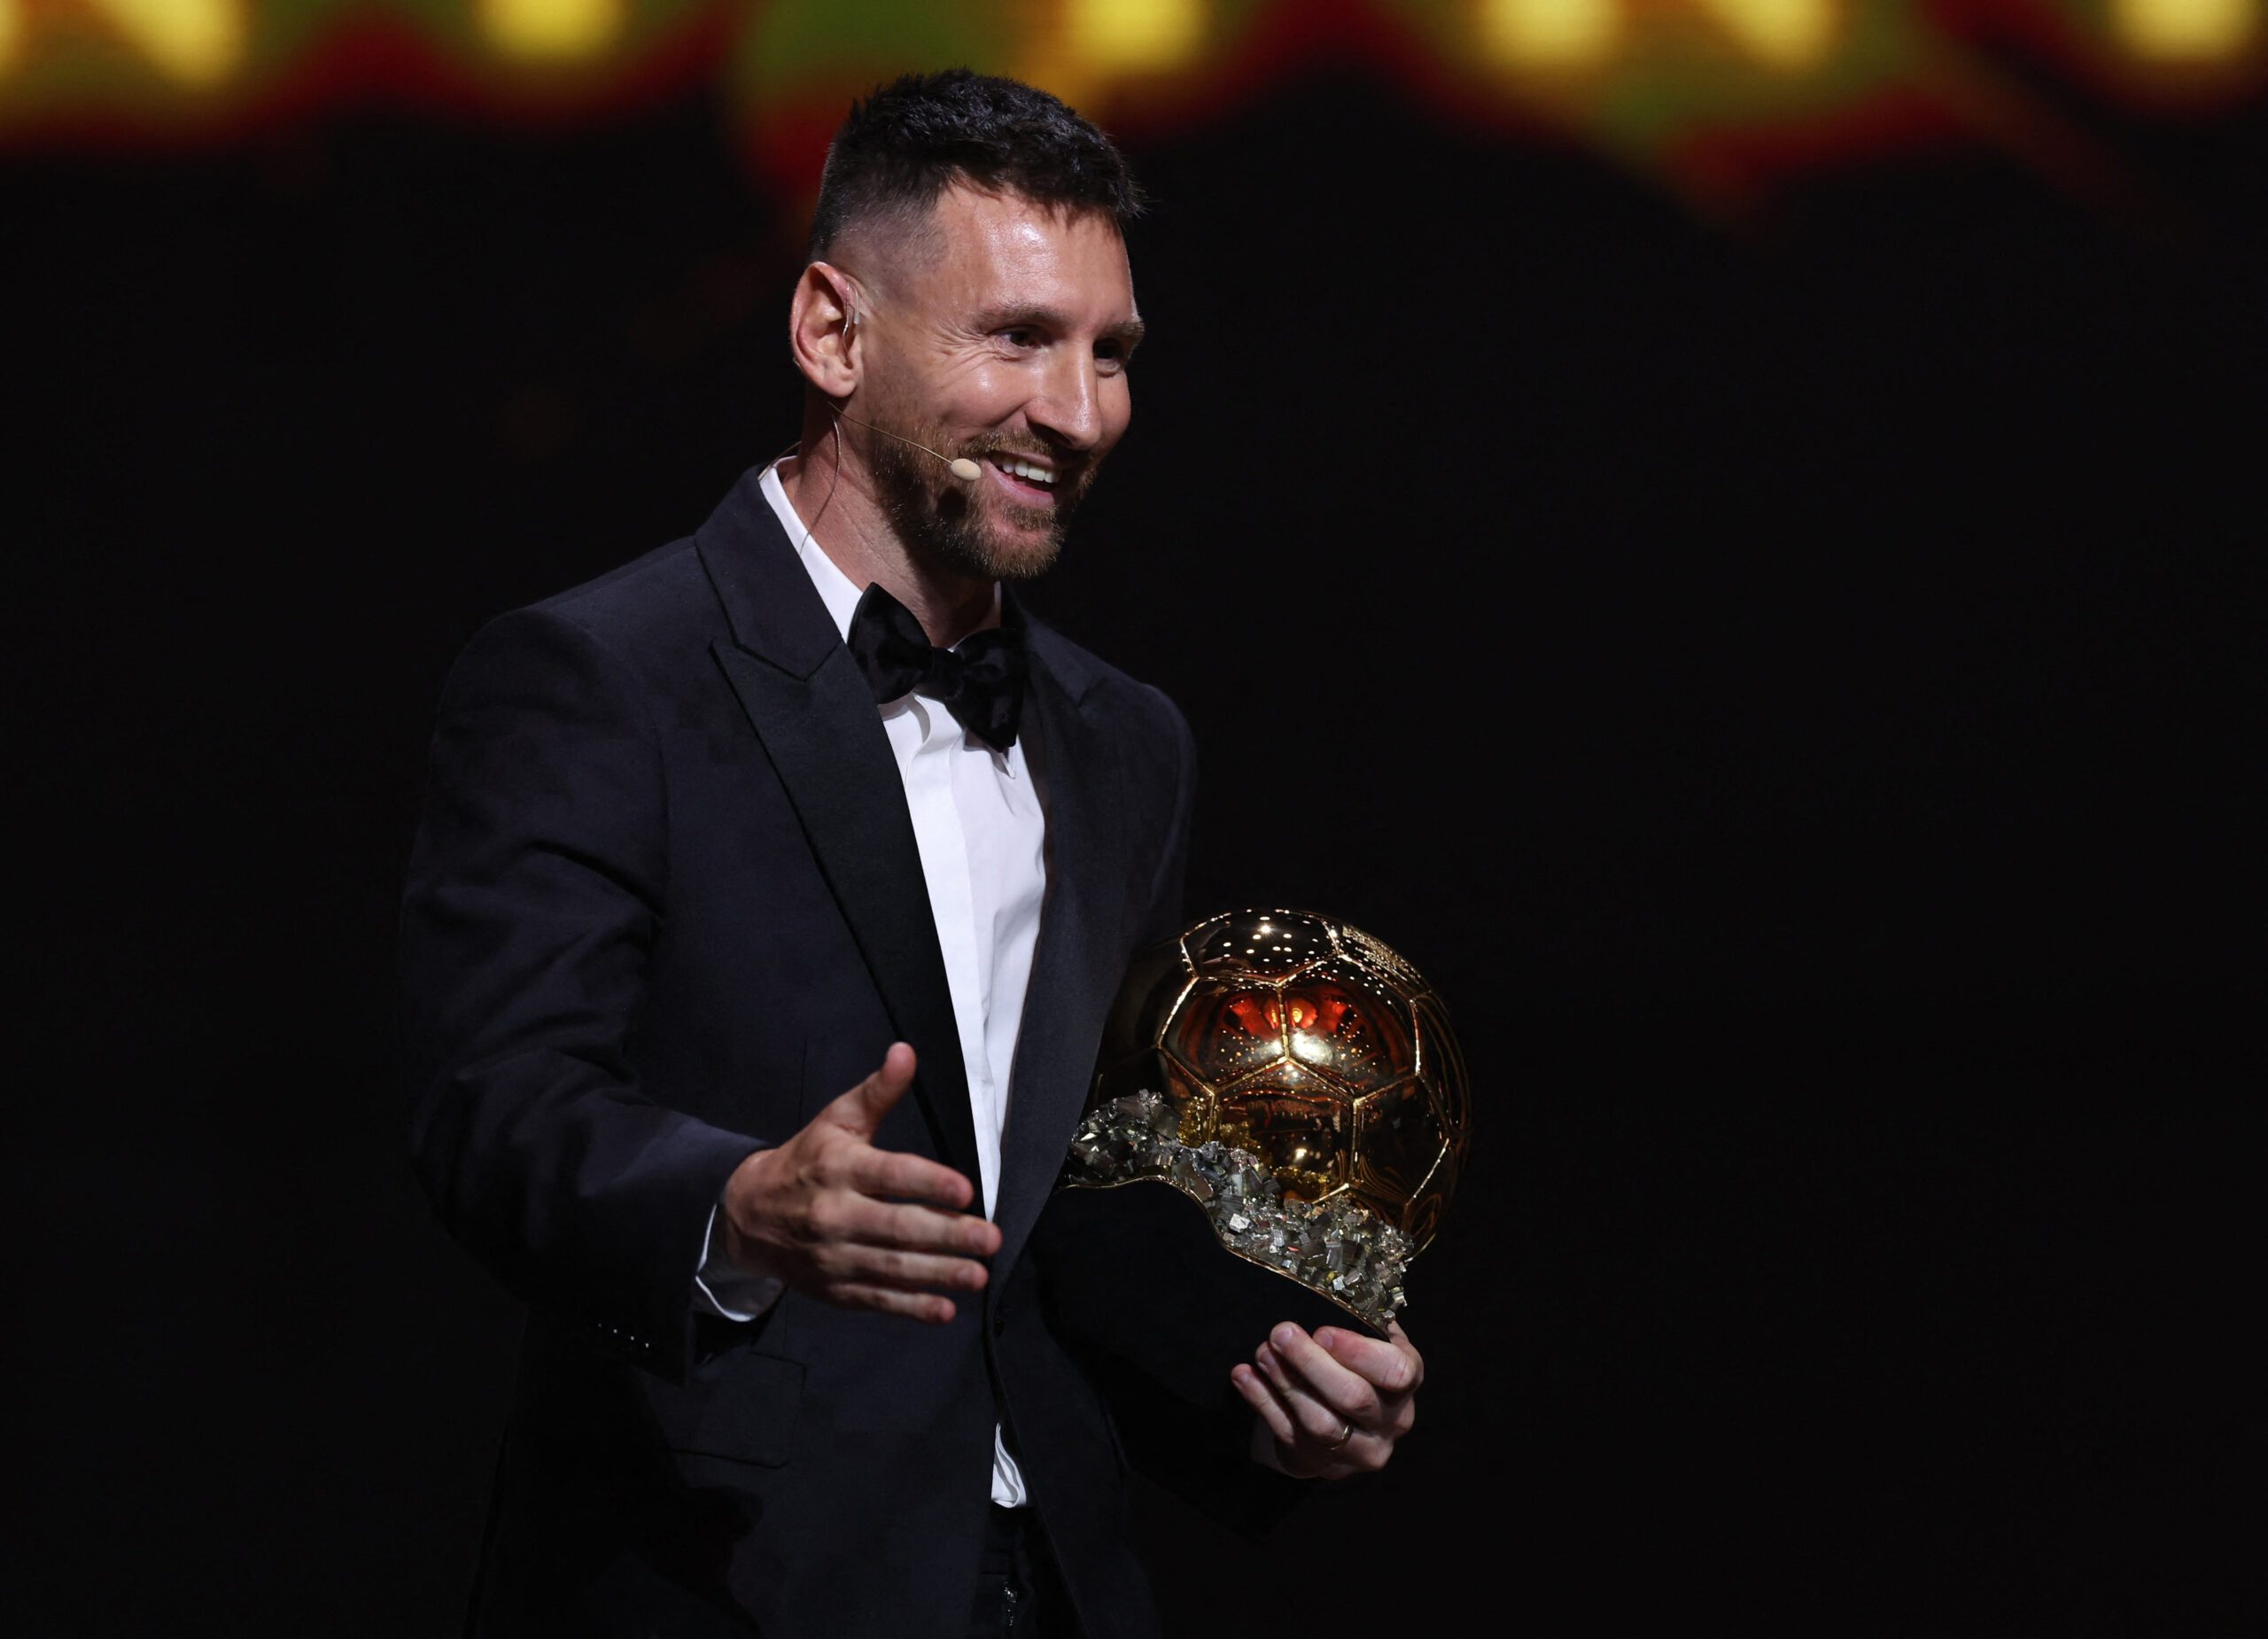 Rare air Lionel Messi wins record eighth Ballon d'Or for best player